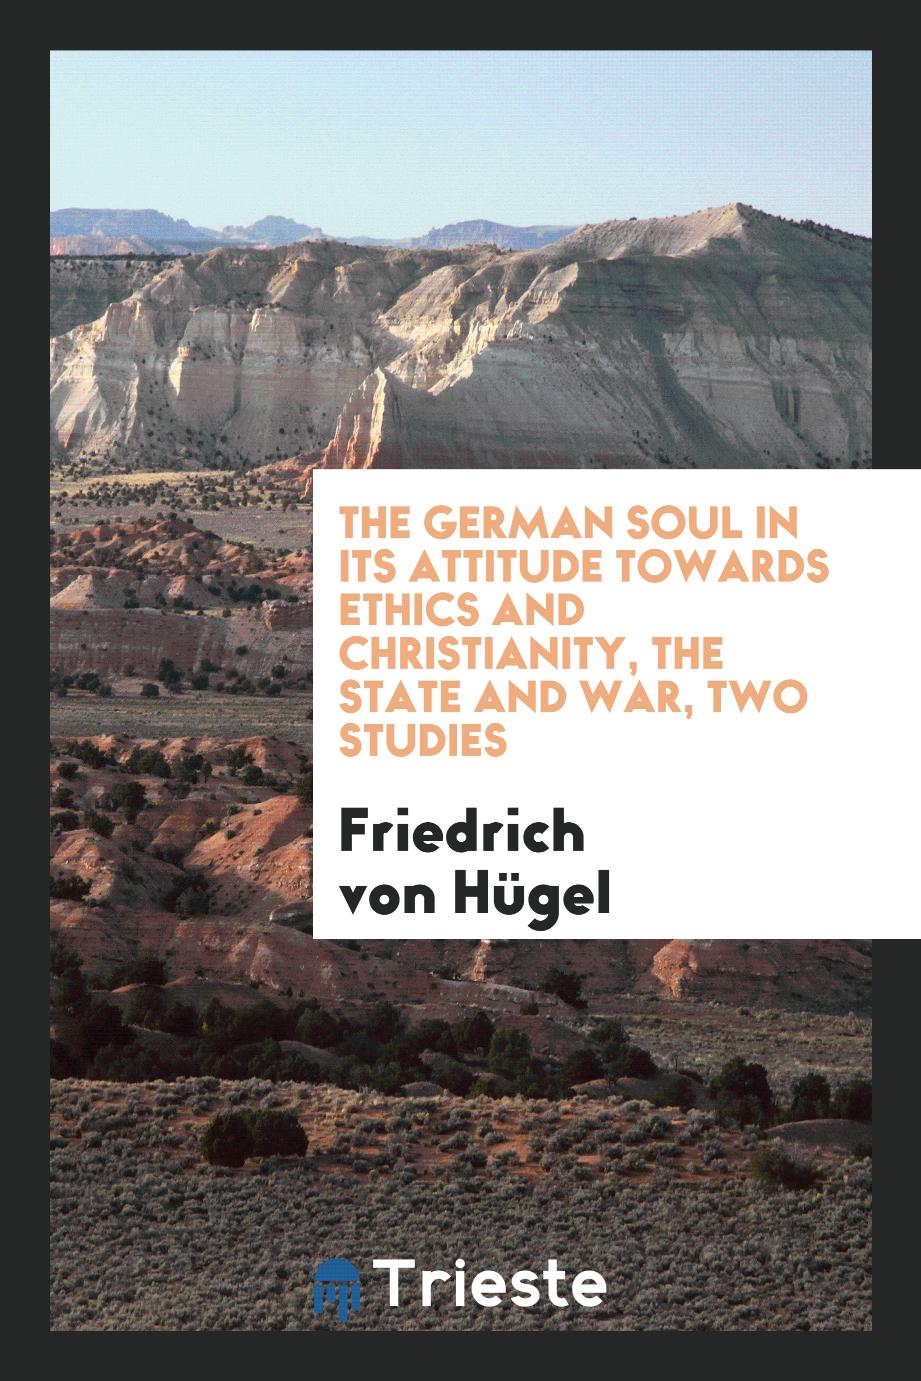 The German soul in its attitude towards ethics and Christianity, the state and war, two studies